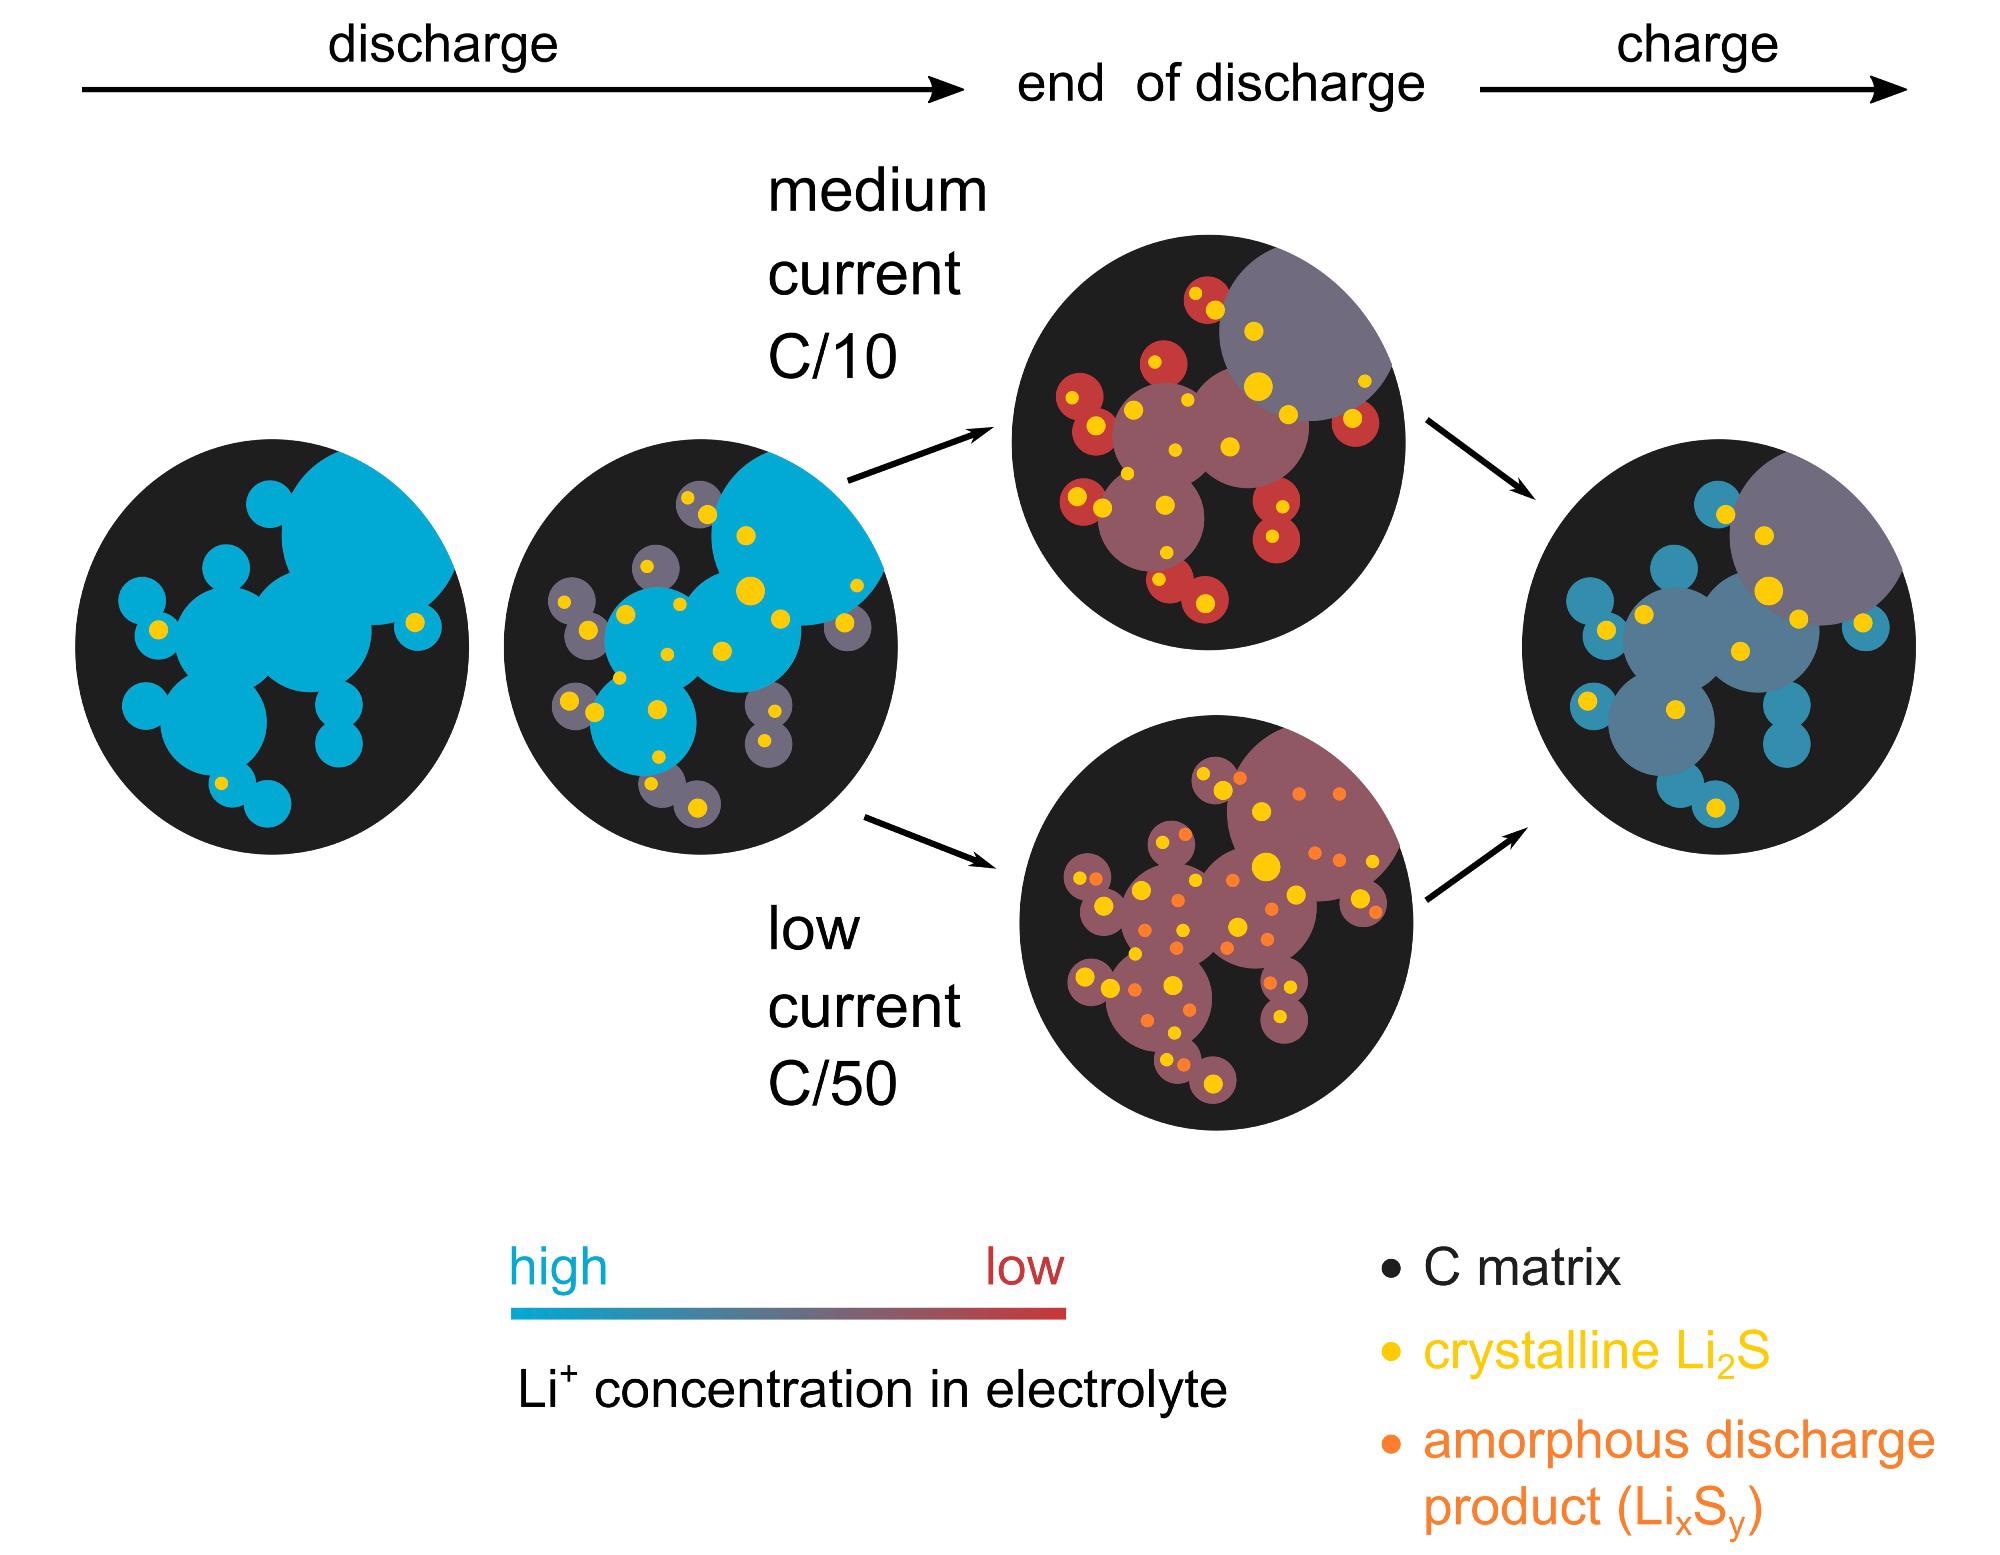 Study Identifies the Processes that Limit the Performance of Lithium-Sulfur Batteries.